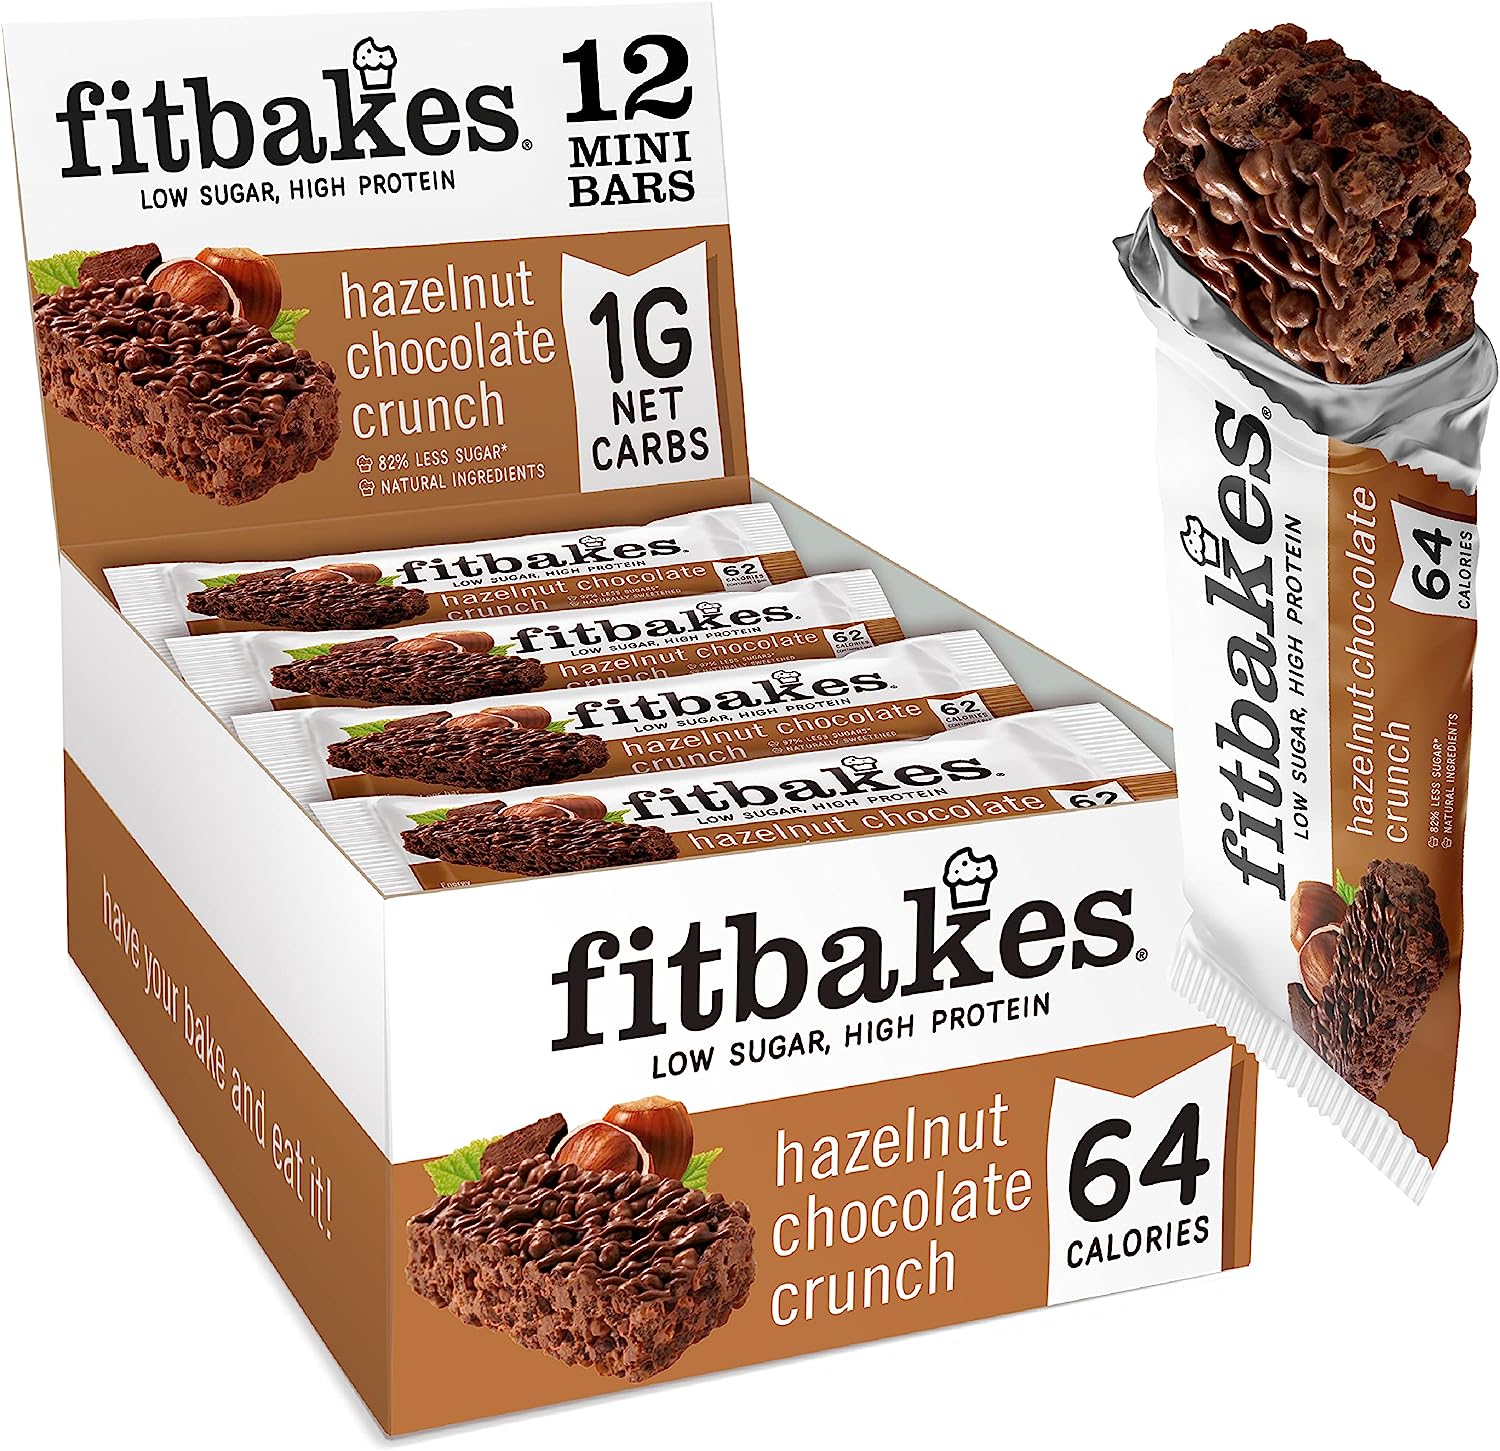 Fitbakes 64 Calories Mini Hazelnut Chocolate Bars 12x19g Review